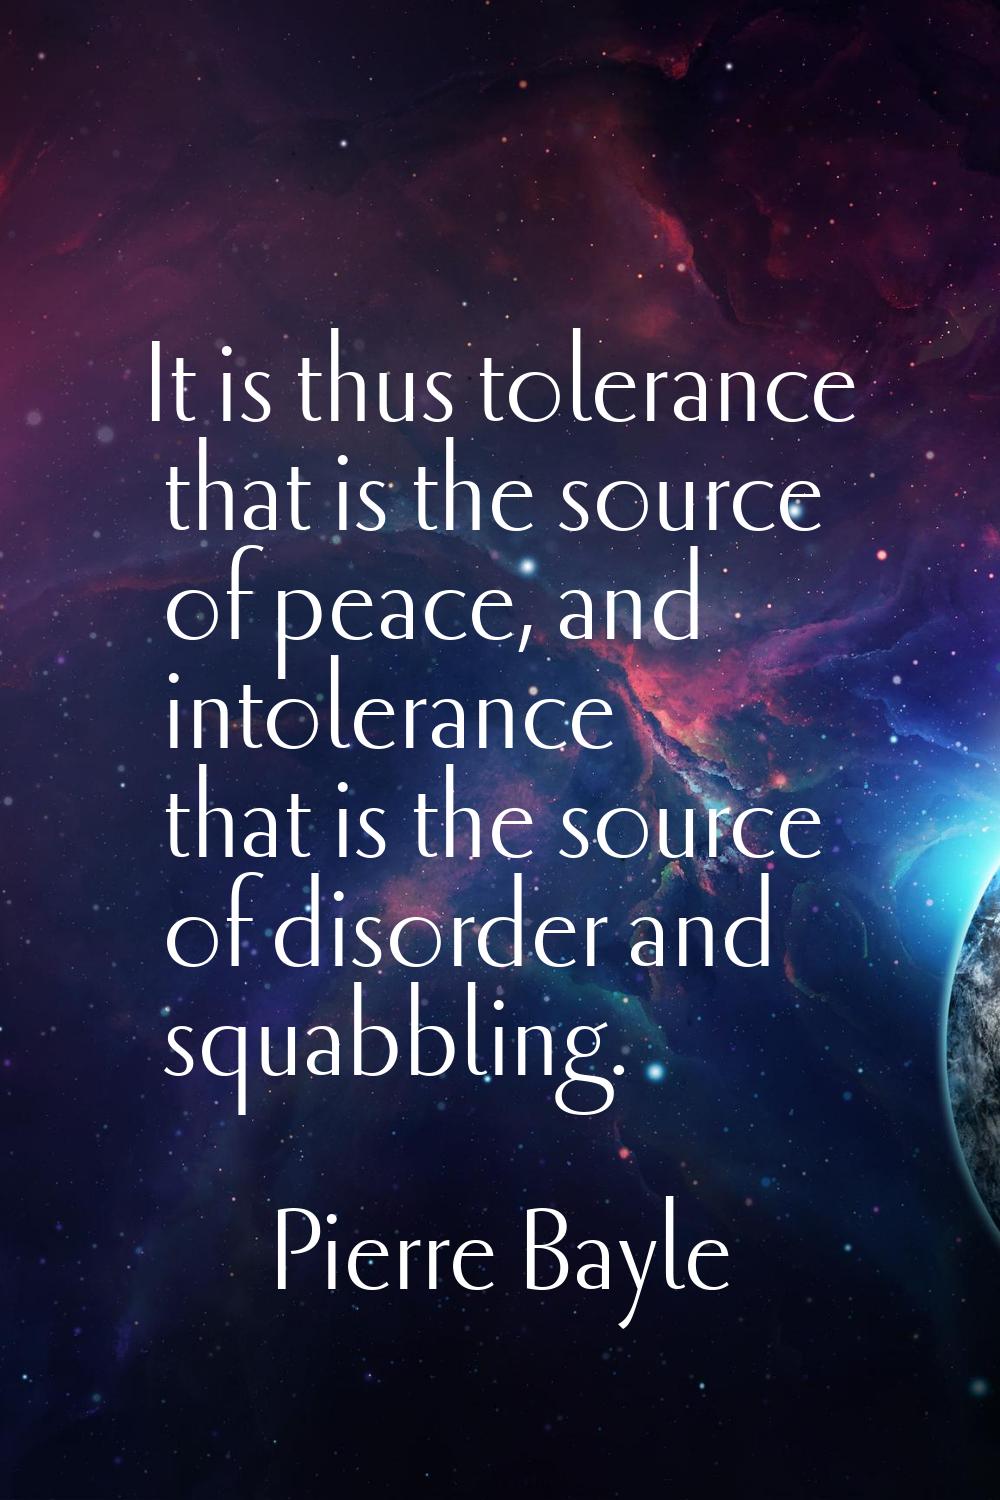 It is thus tolerance that is the source of peace, and intolerance that is the source of disorder an